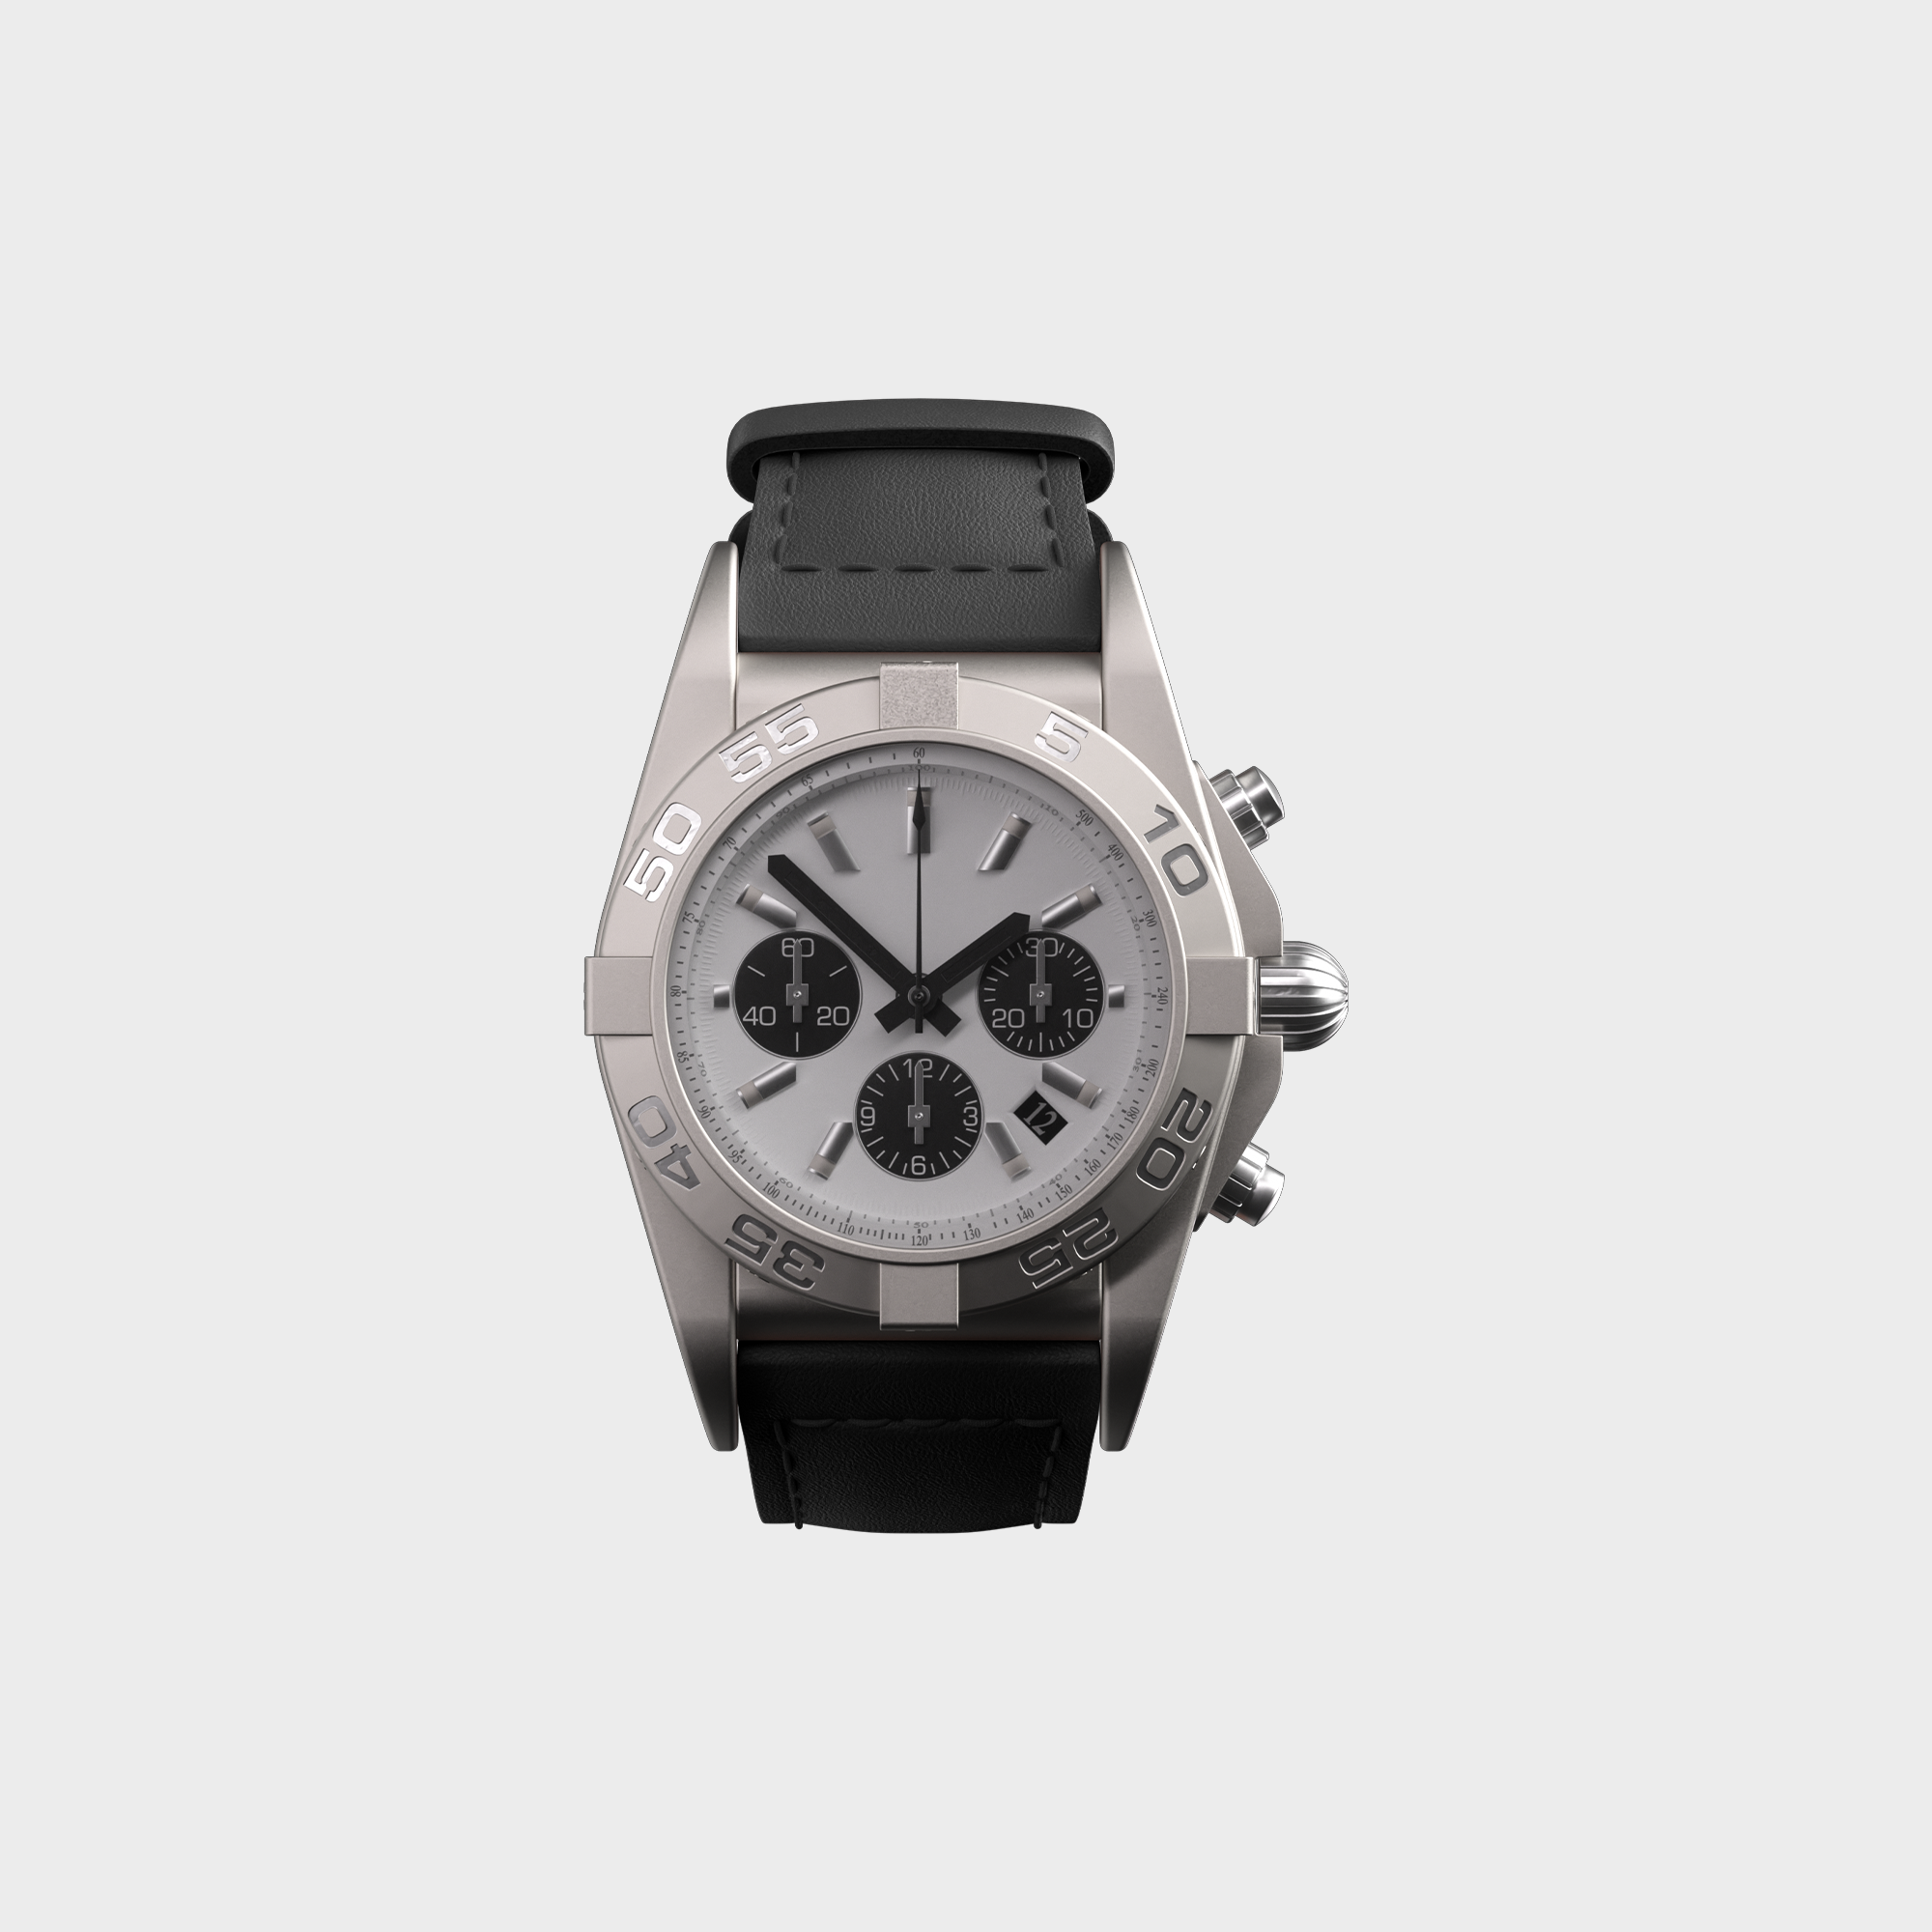 Luxury stainless steel chronograph watch with black leather strap on a white background.